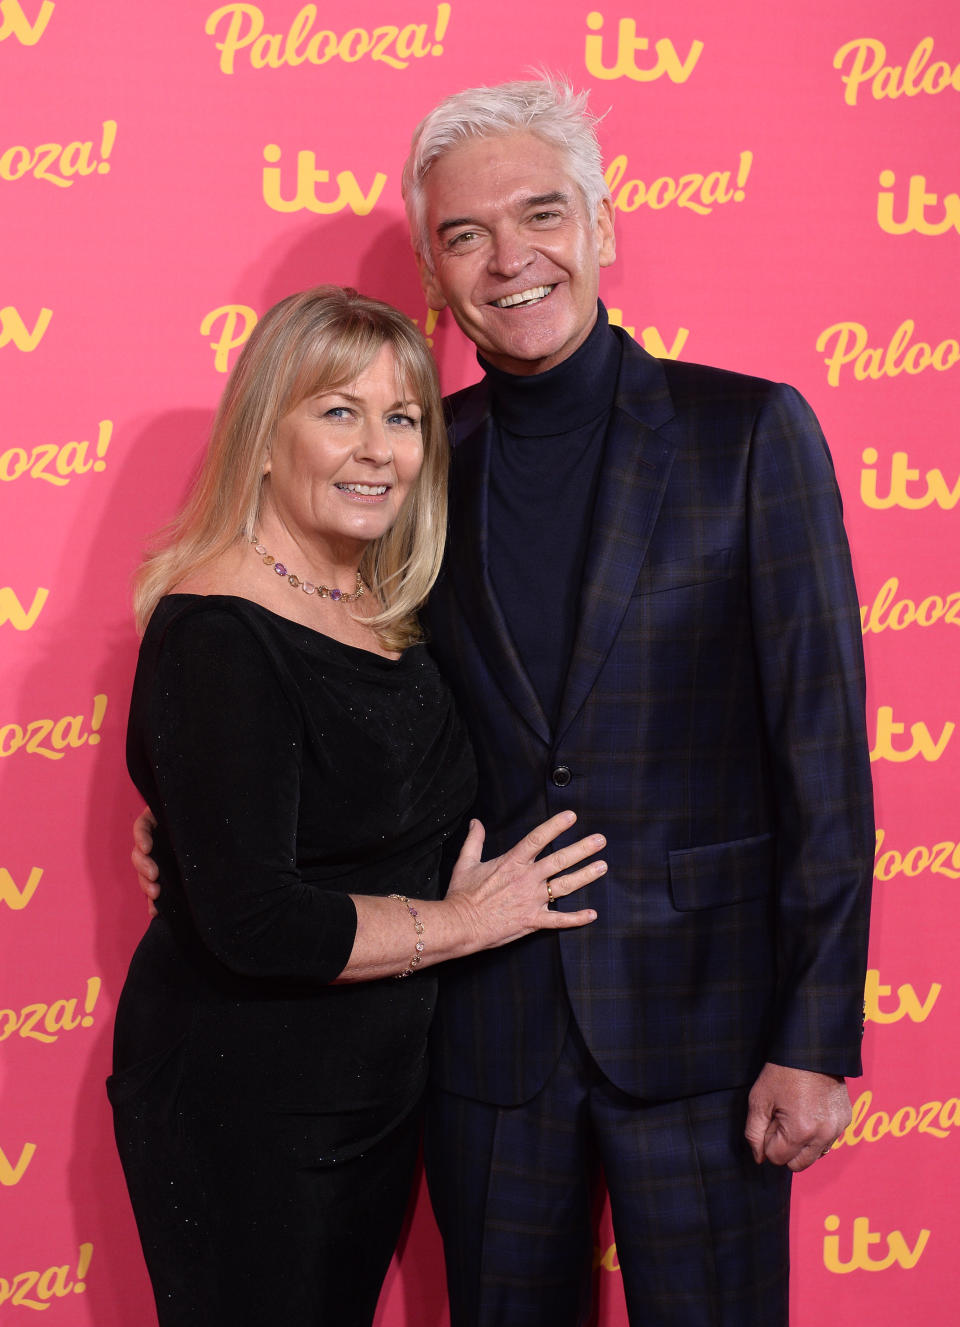 Stephanie Lowe and Phillip Schofield attend the ITV Palooza 2019 at the Royal Festival Hall on November 12, 2019 in London, England. (Photo by Jeff Spicer/Getty Images)